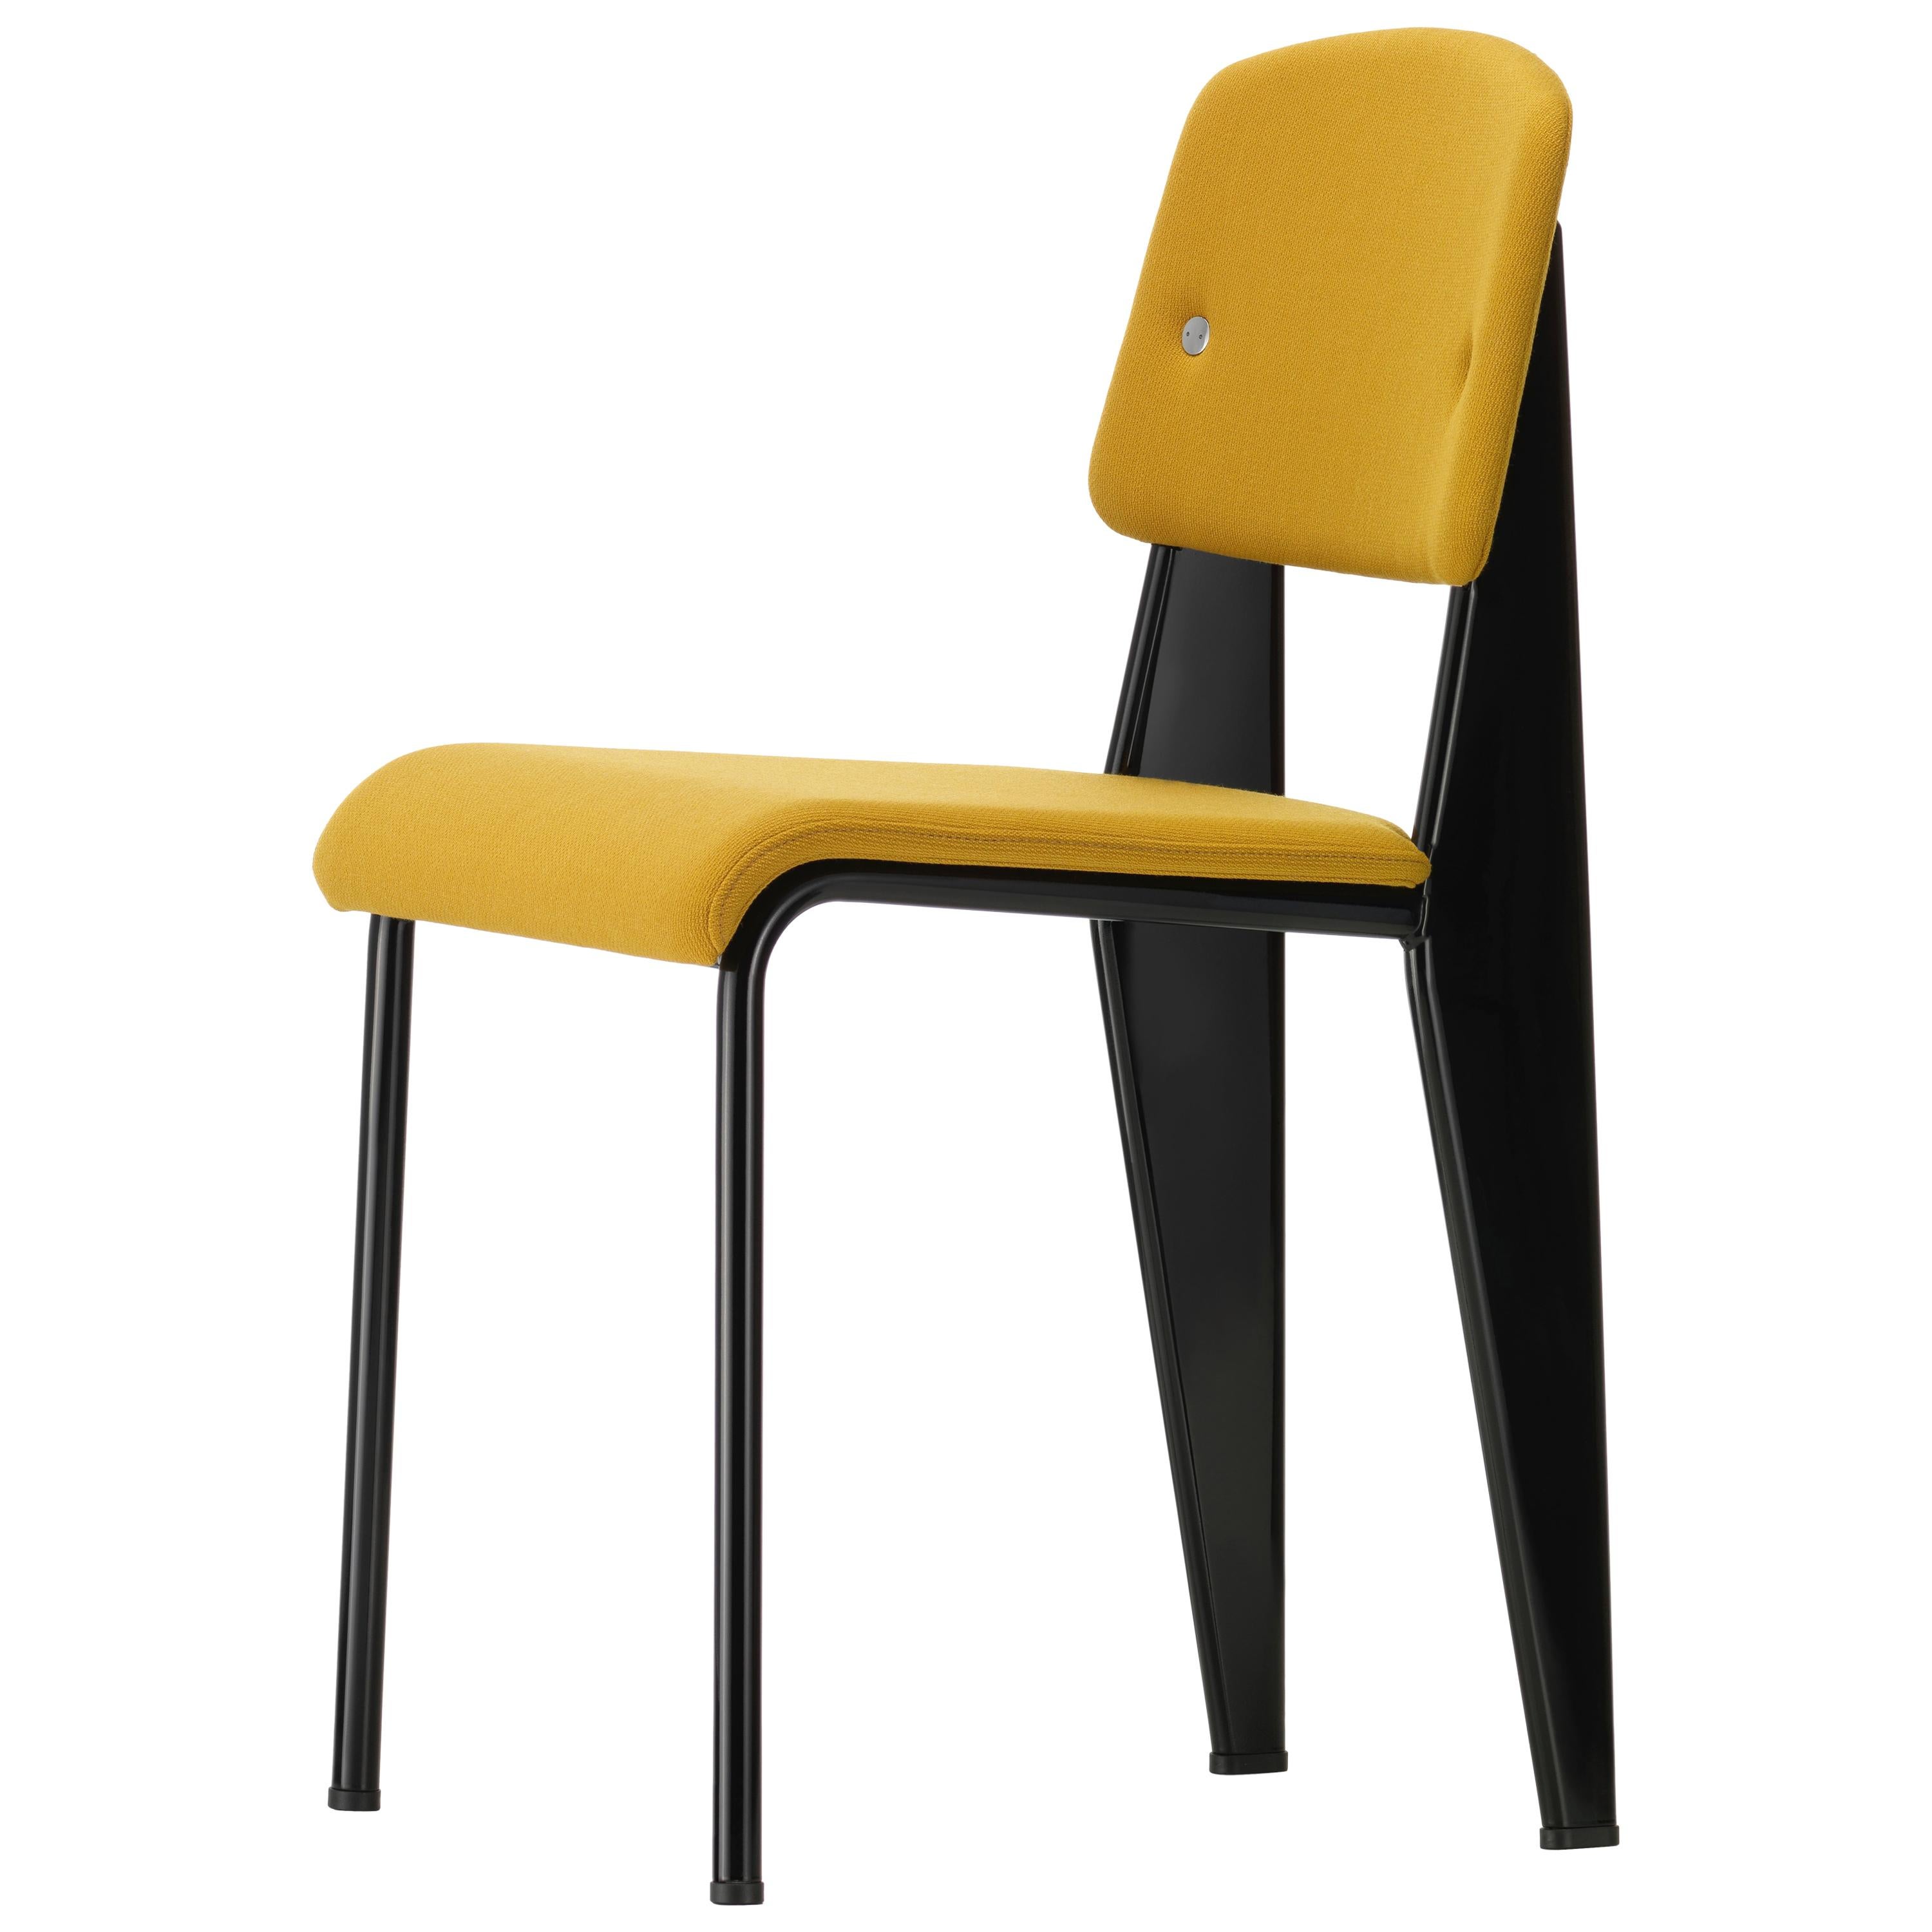 Vitra Standard SR Chair in Canola and Deep Black by Jean Prouvé For Sale